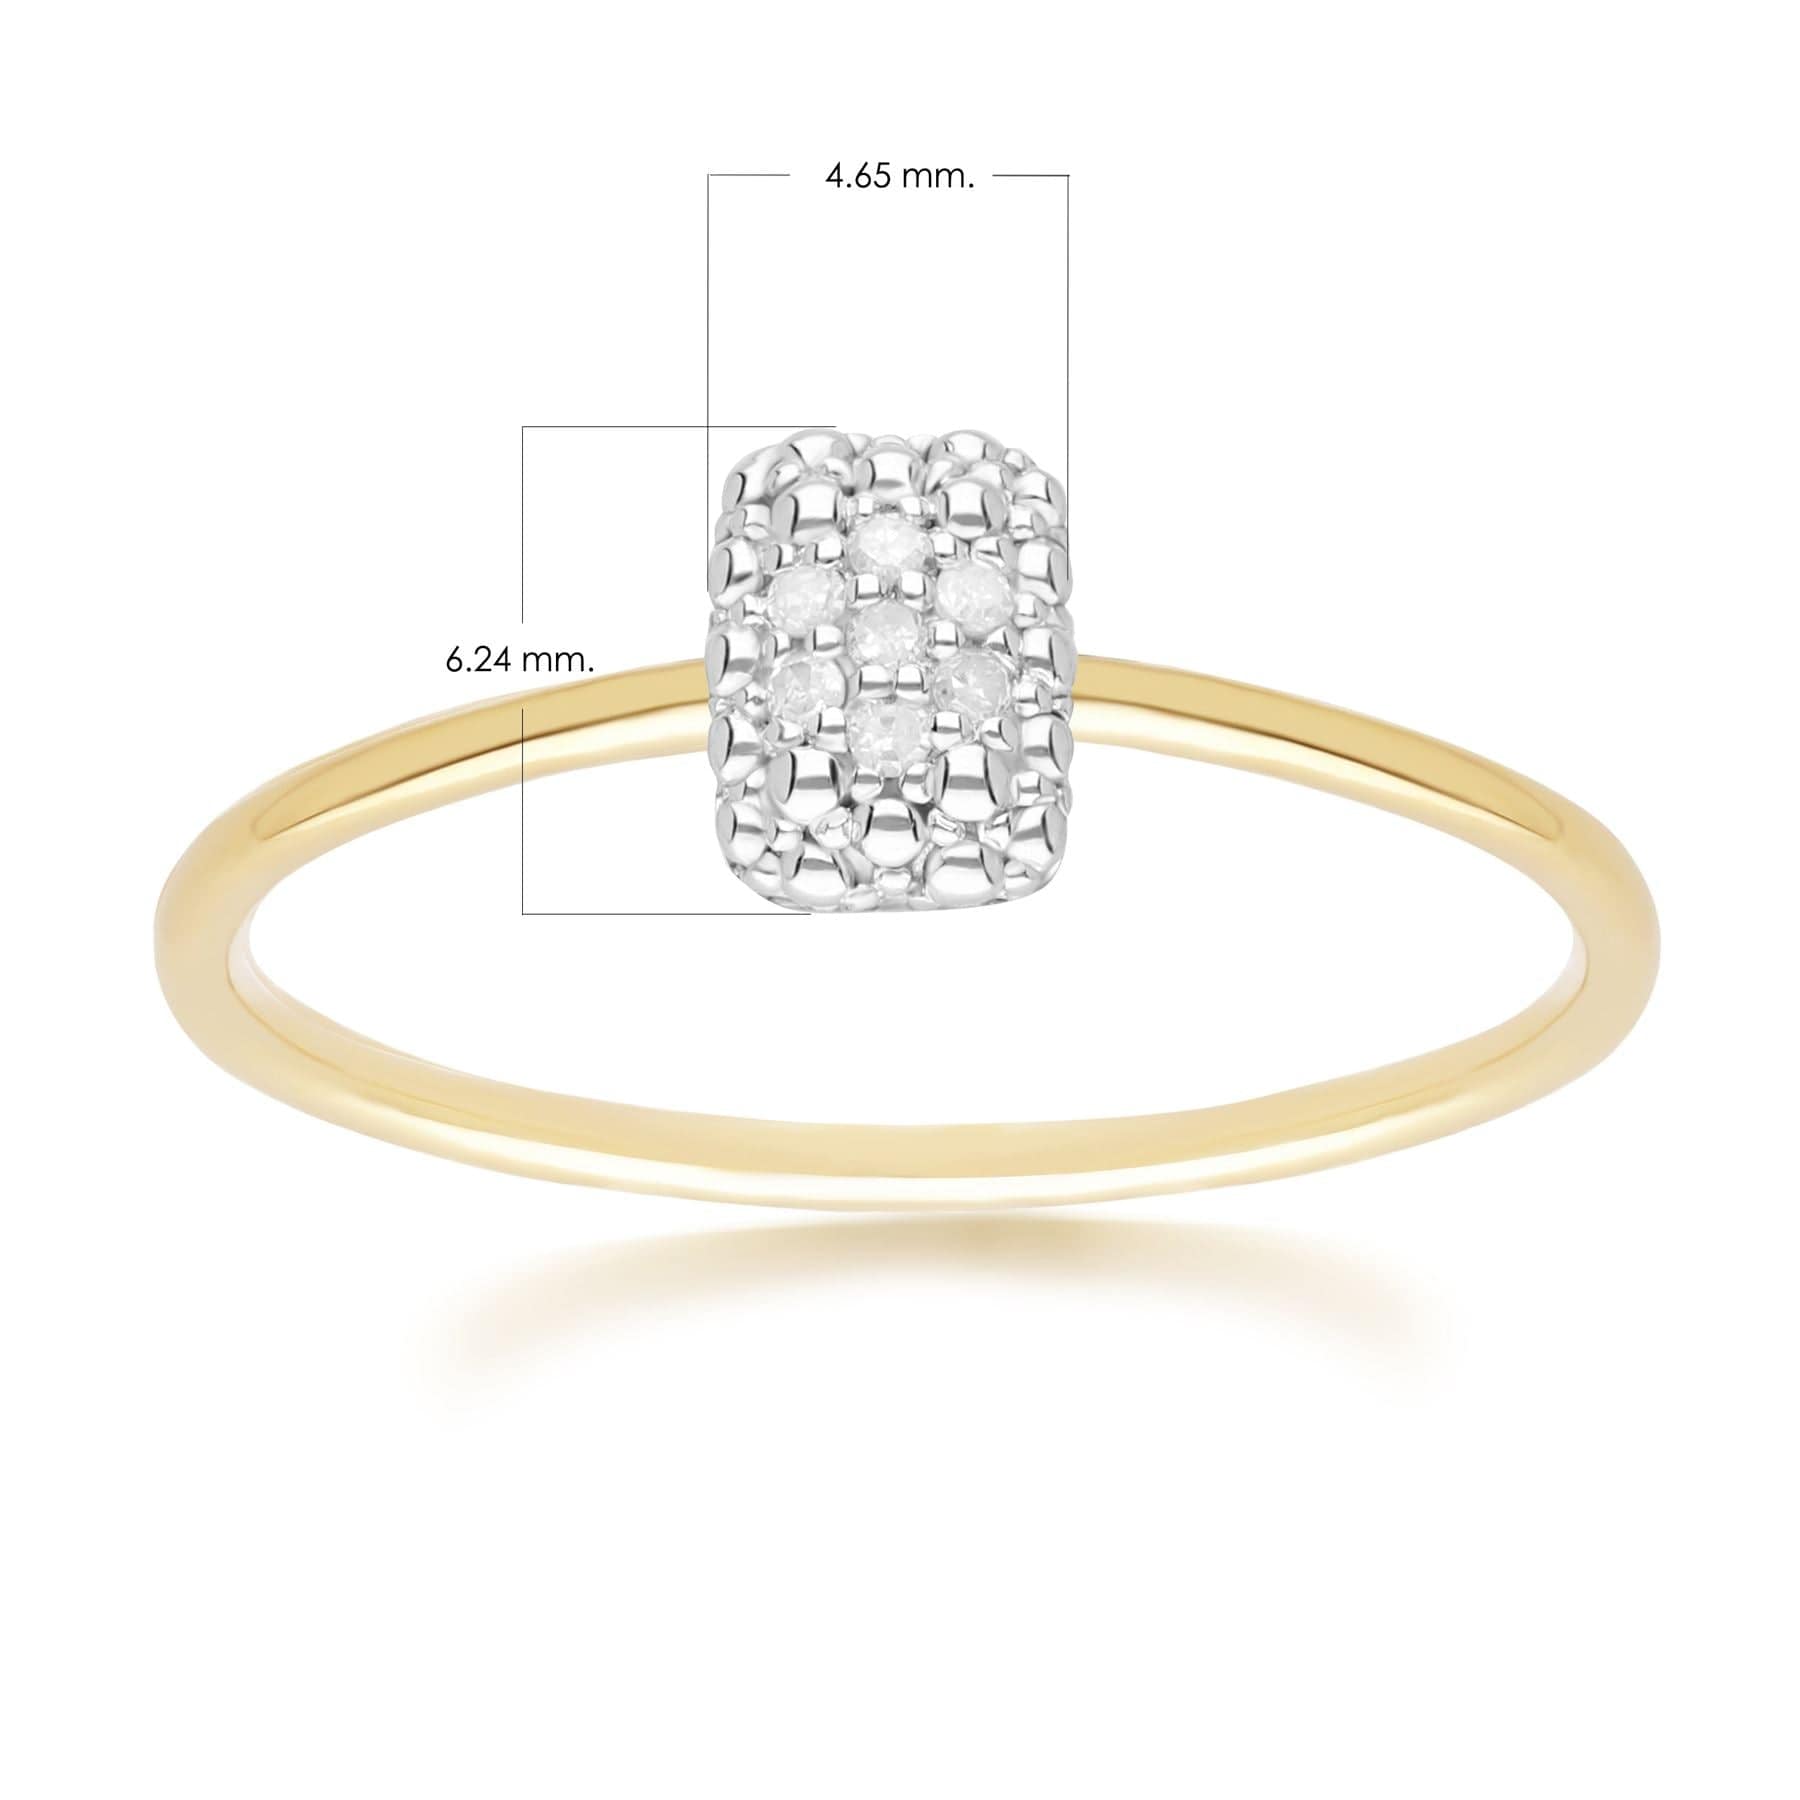 191R0929019 Diamond Pave Rectangle Ring 9ct Yellow Gold Dimensions